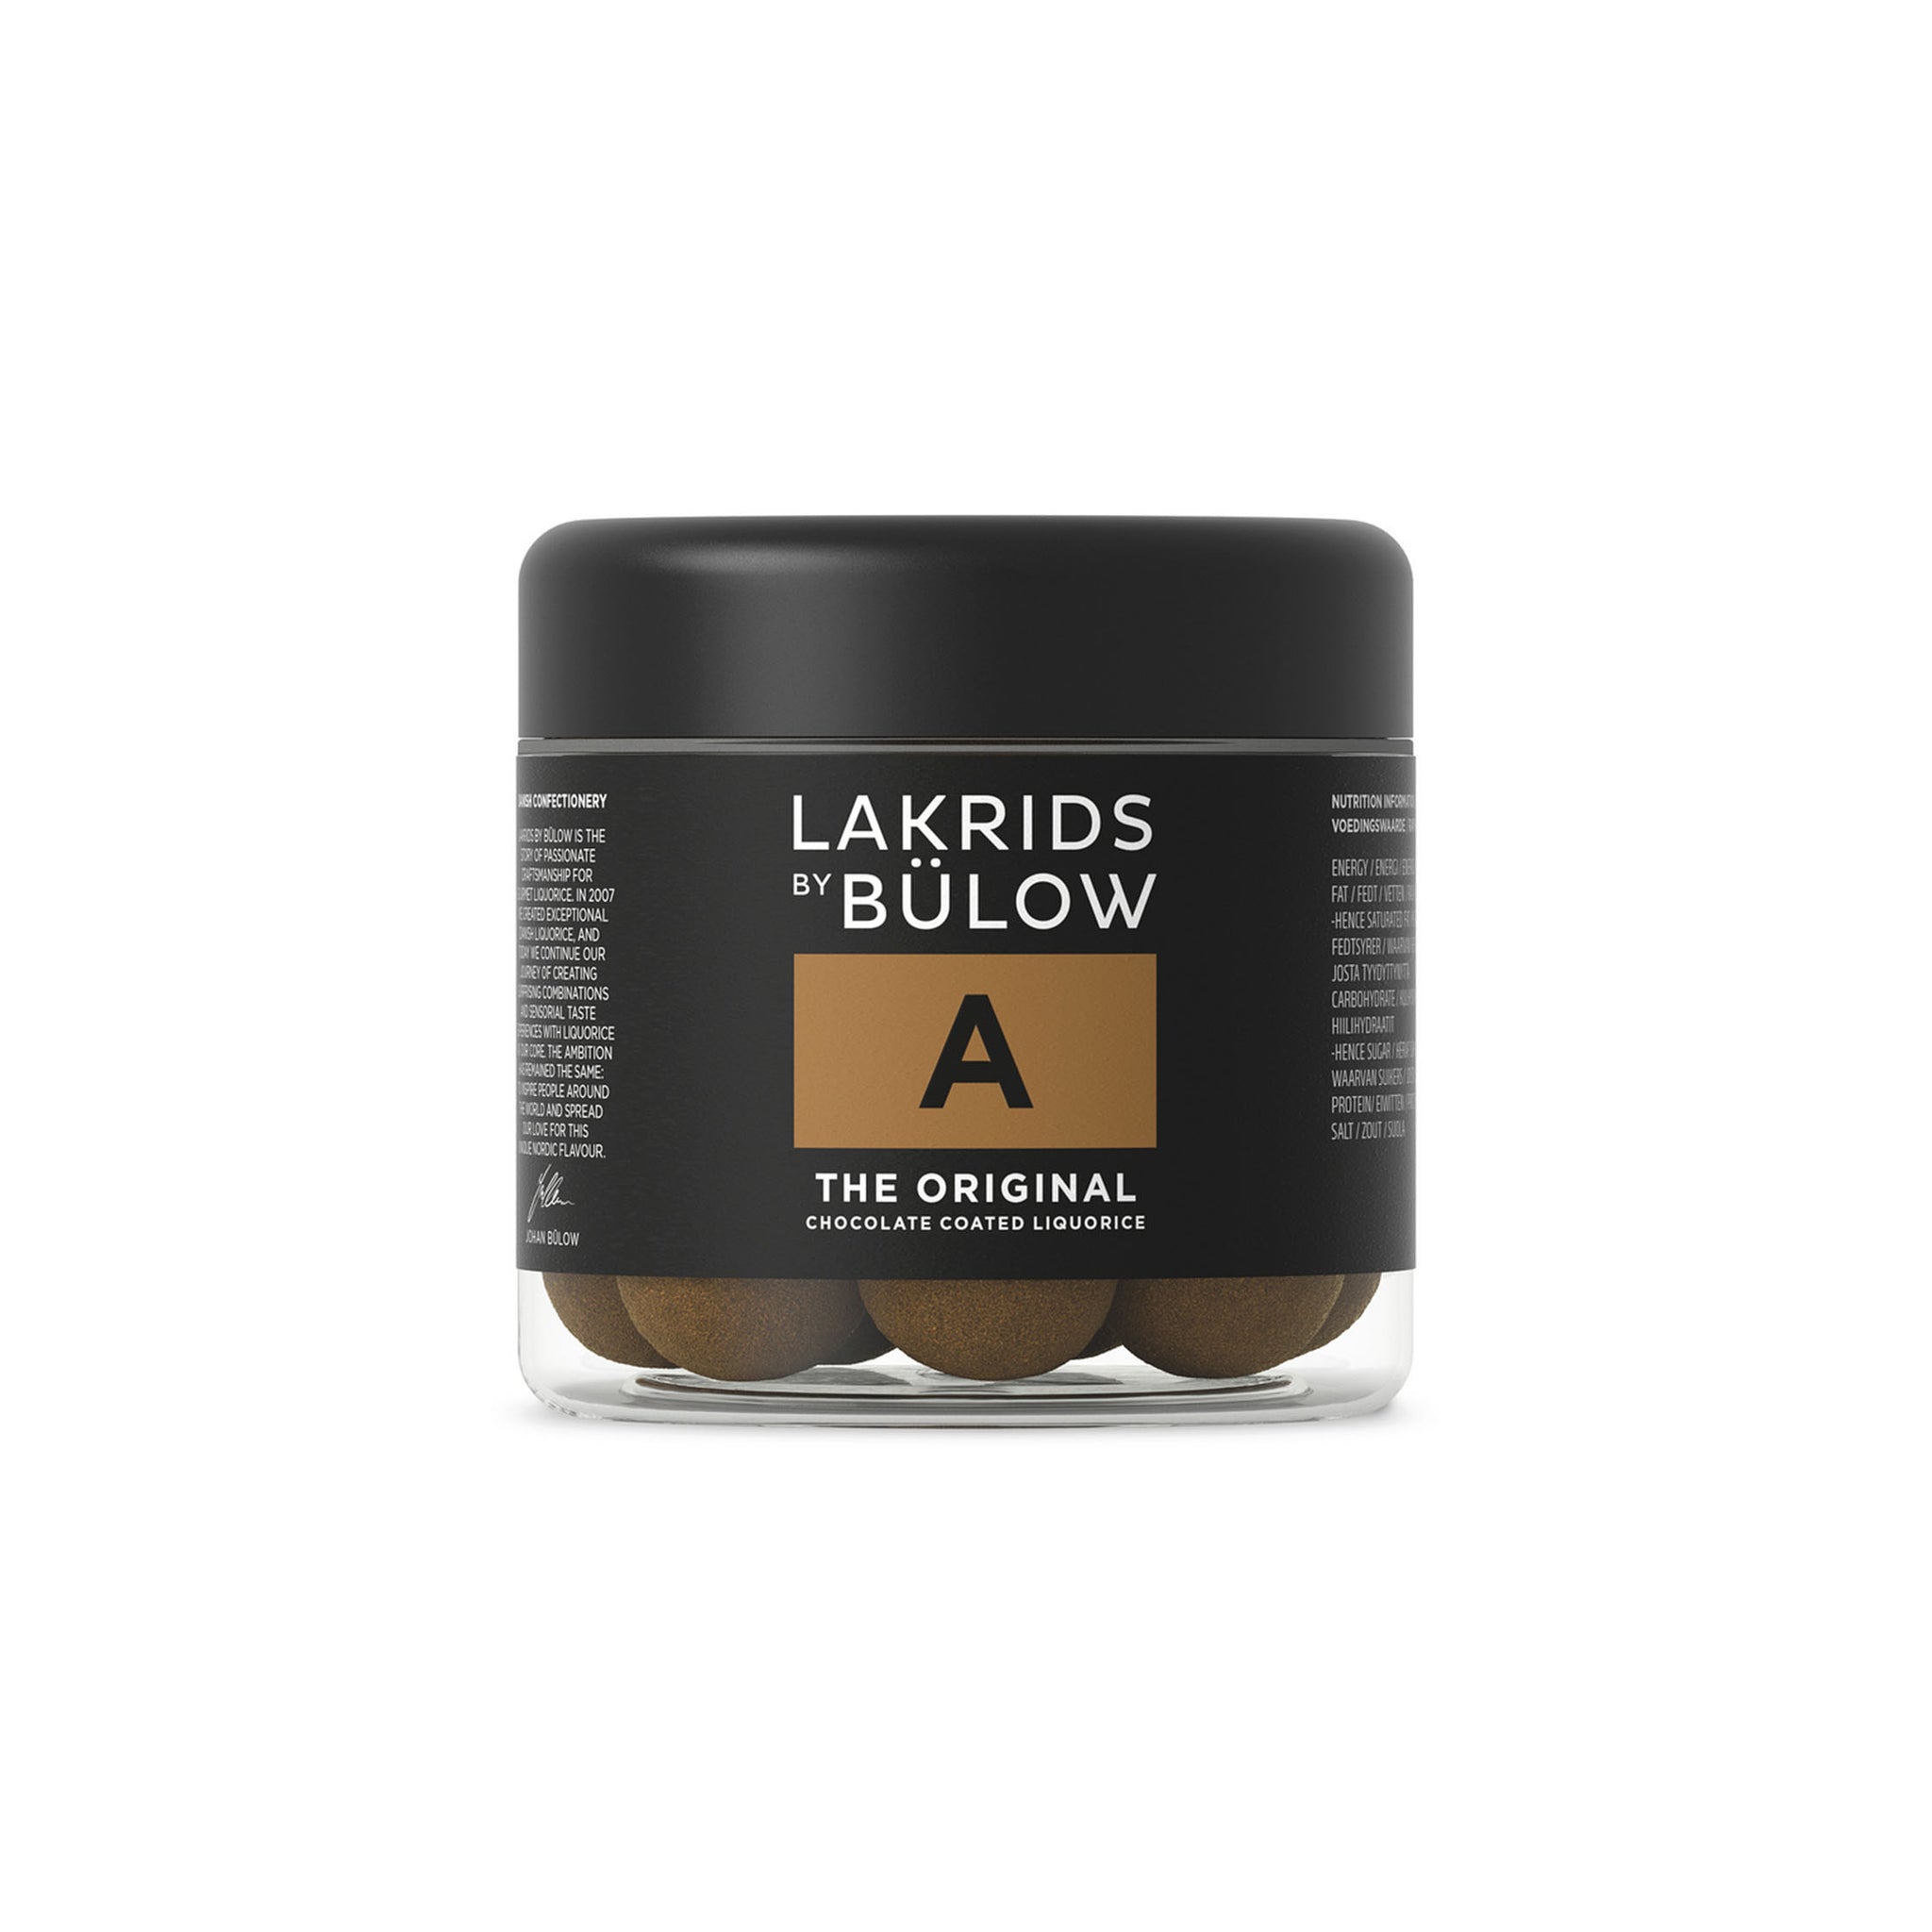 Lakrids Liquorice A Chocolate Coated Liquorice 125g Ingredients Chocolate Bars & Confectionery